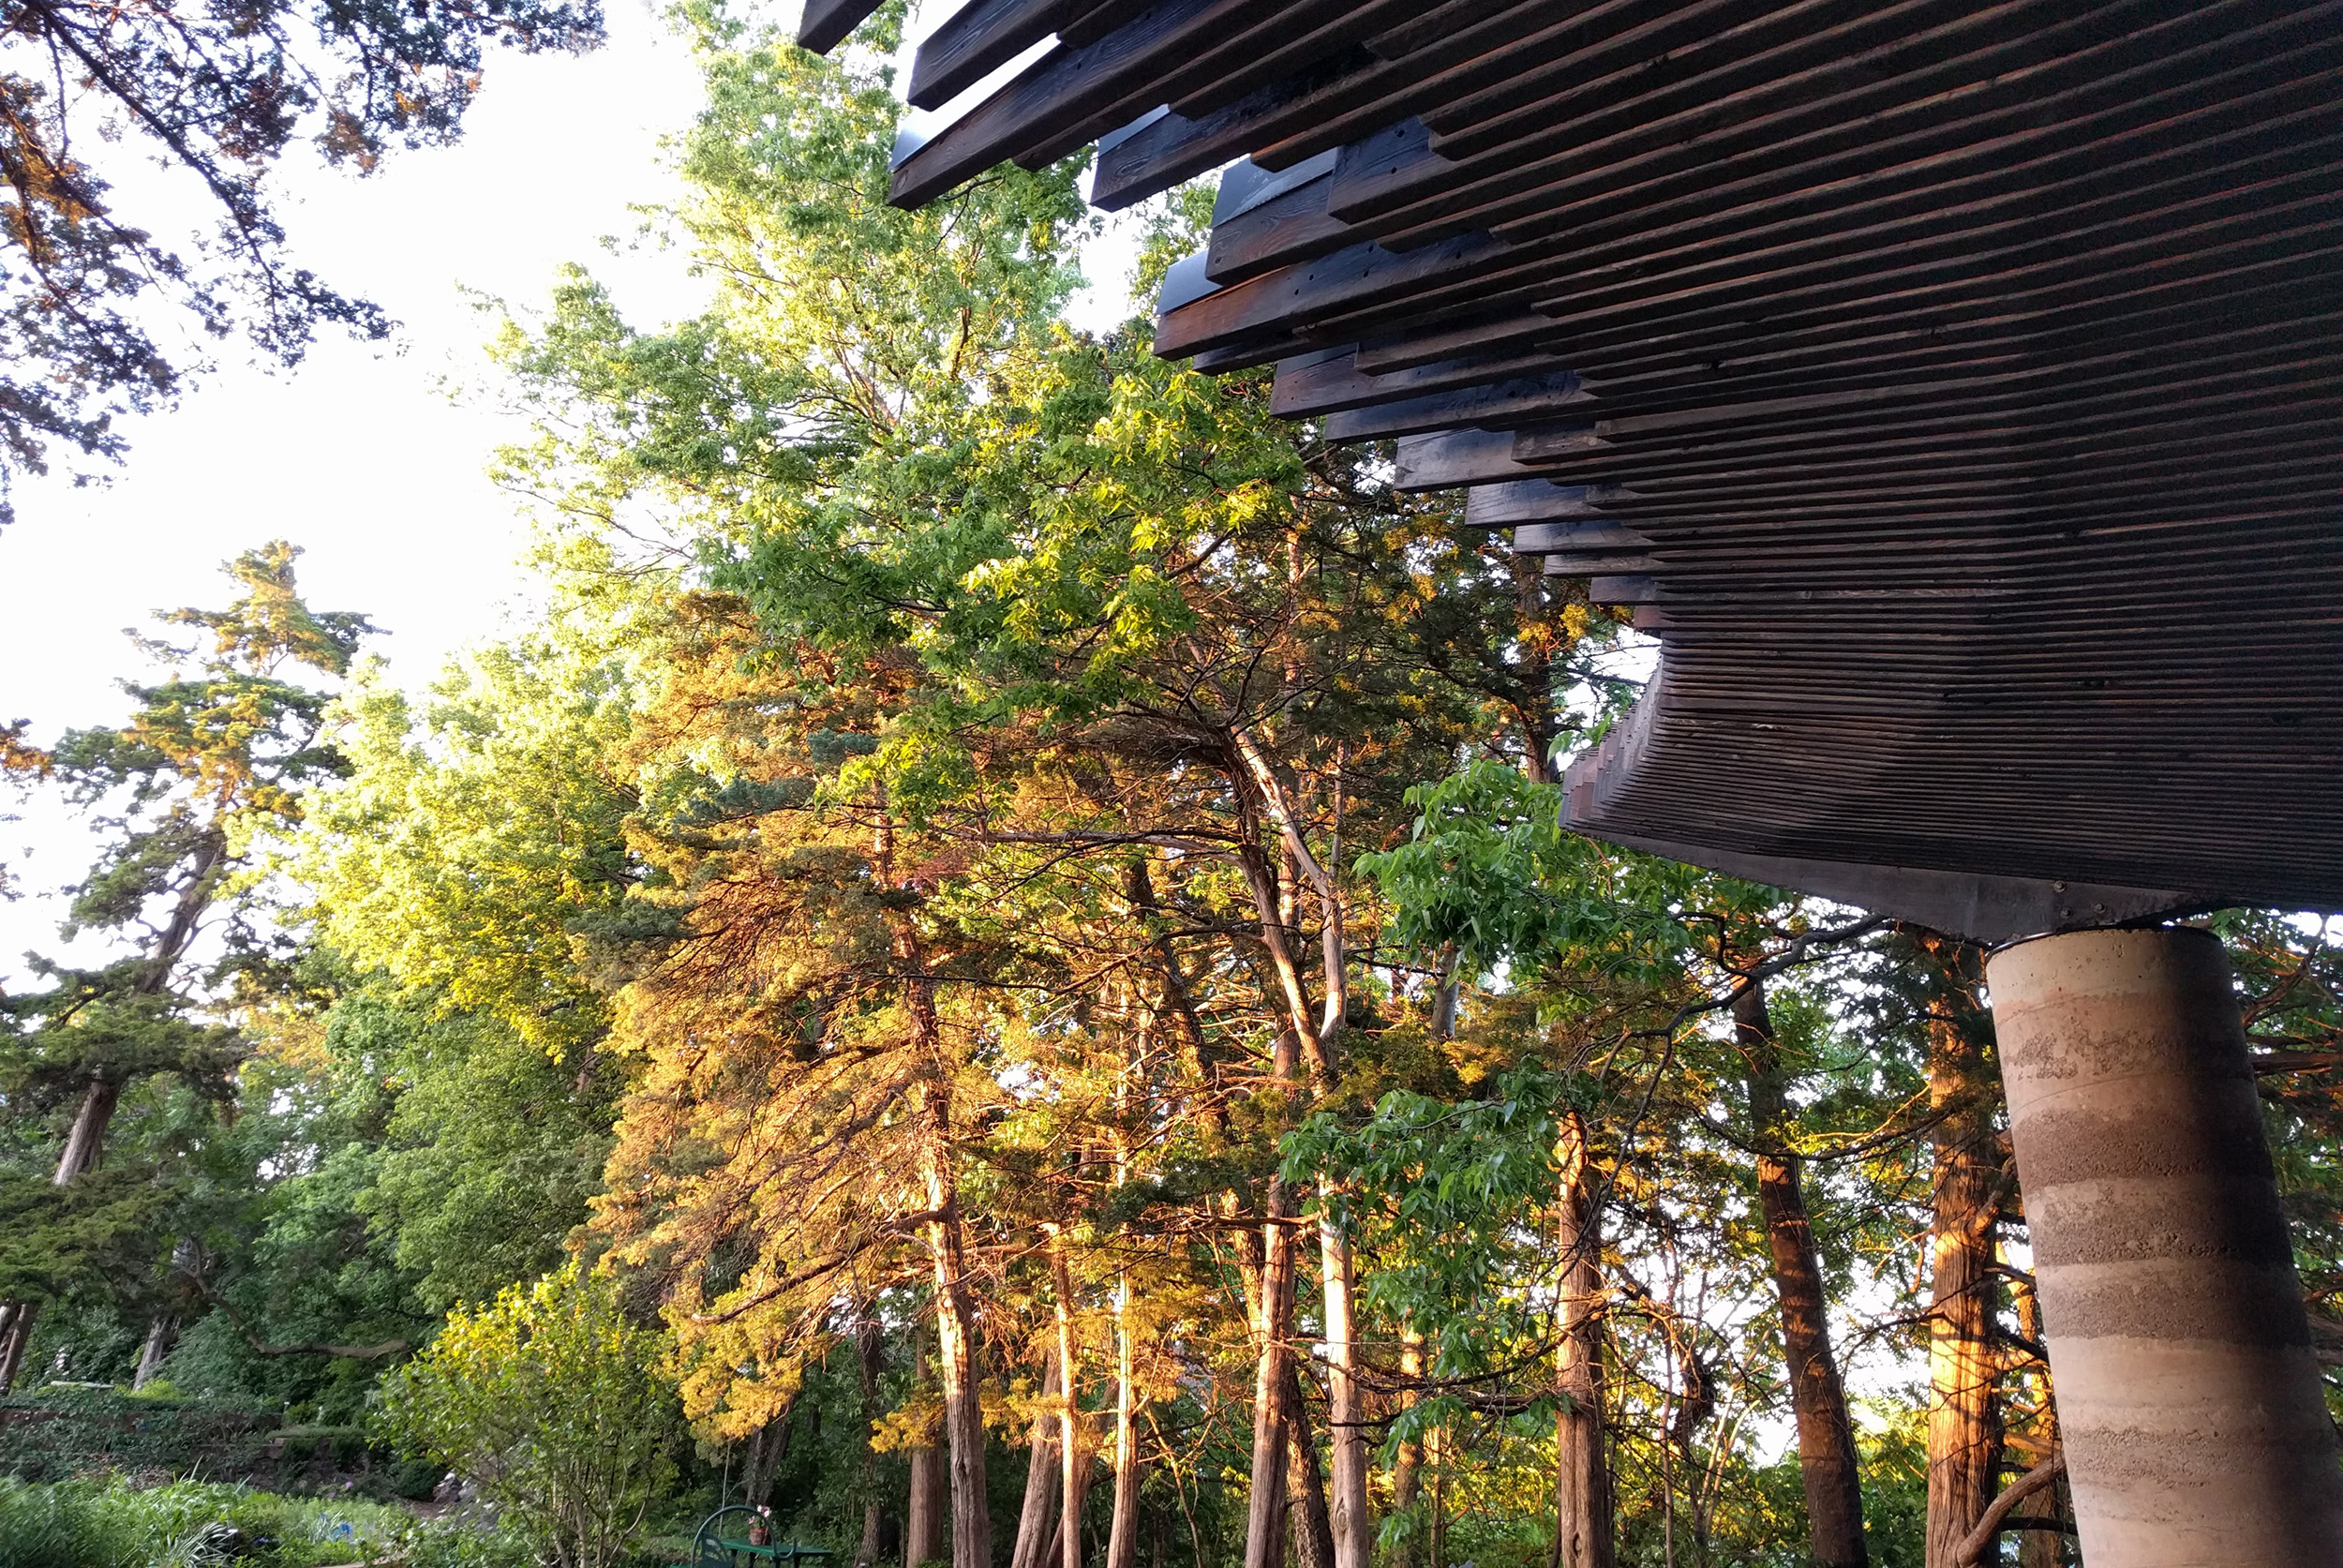 Sensory Pavilion, the feathered edge of the canopy